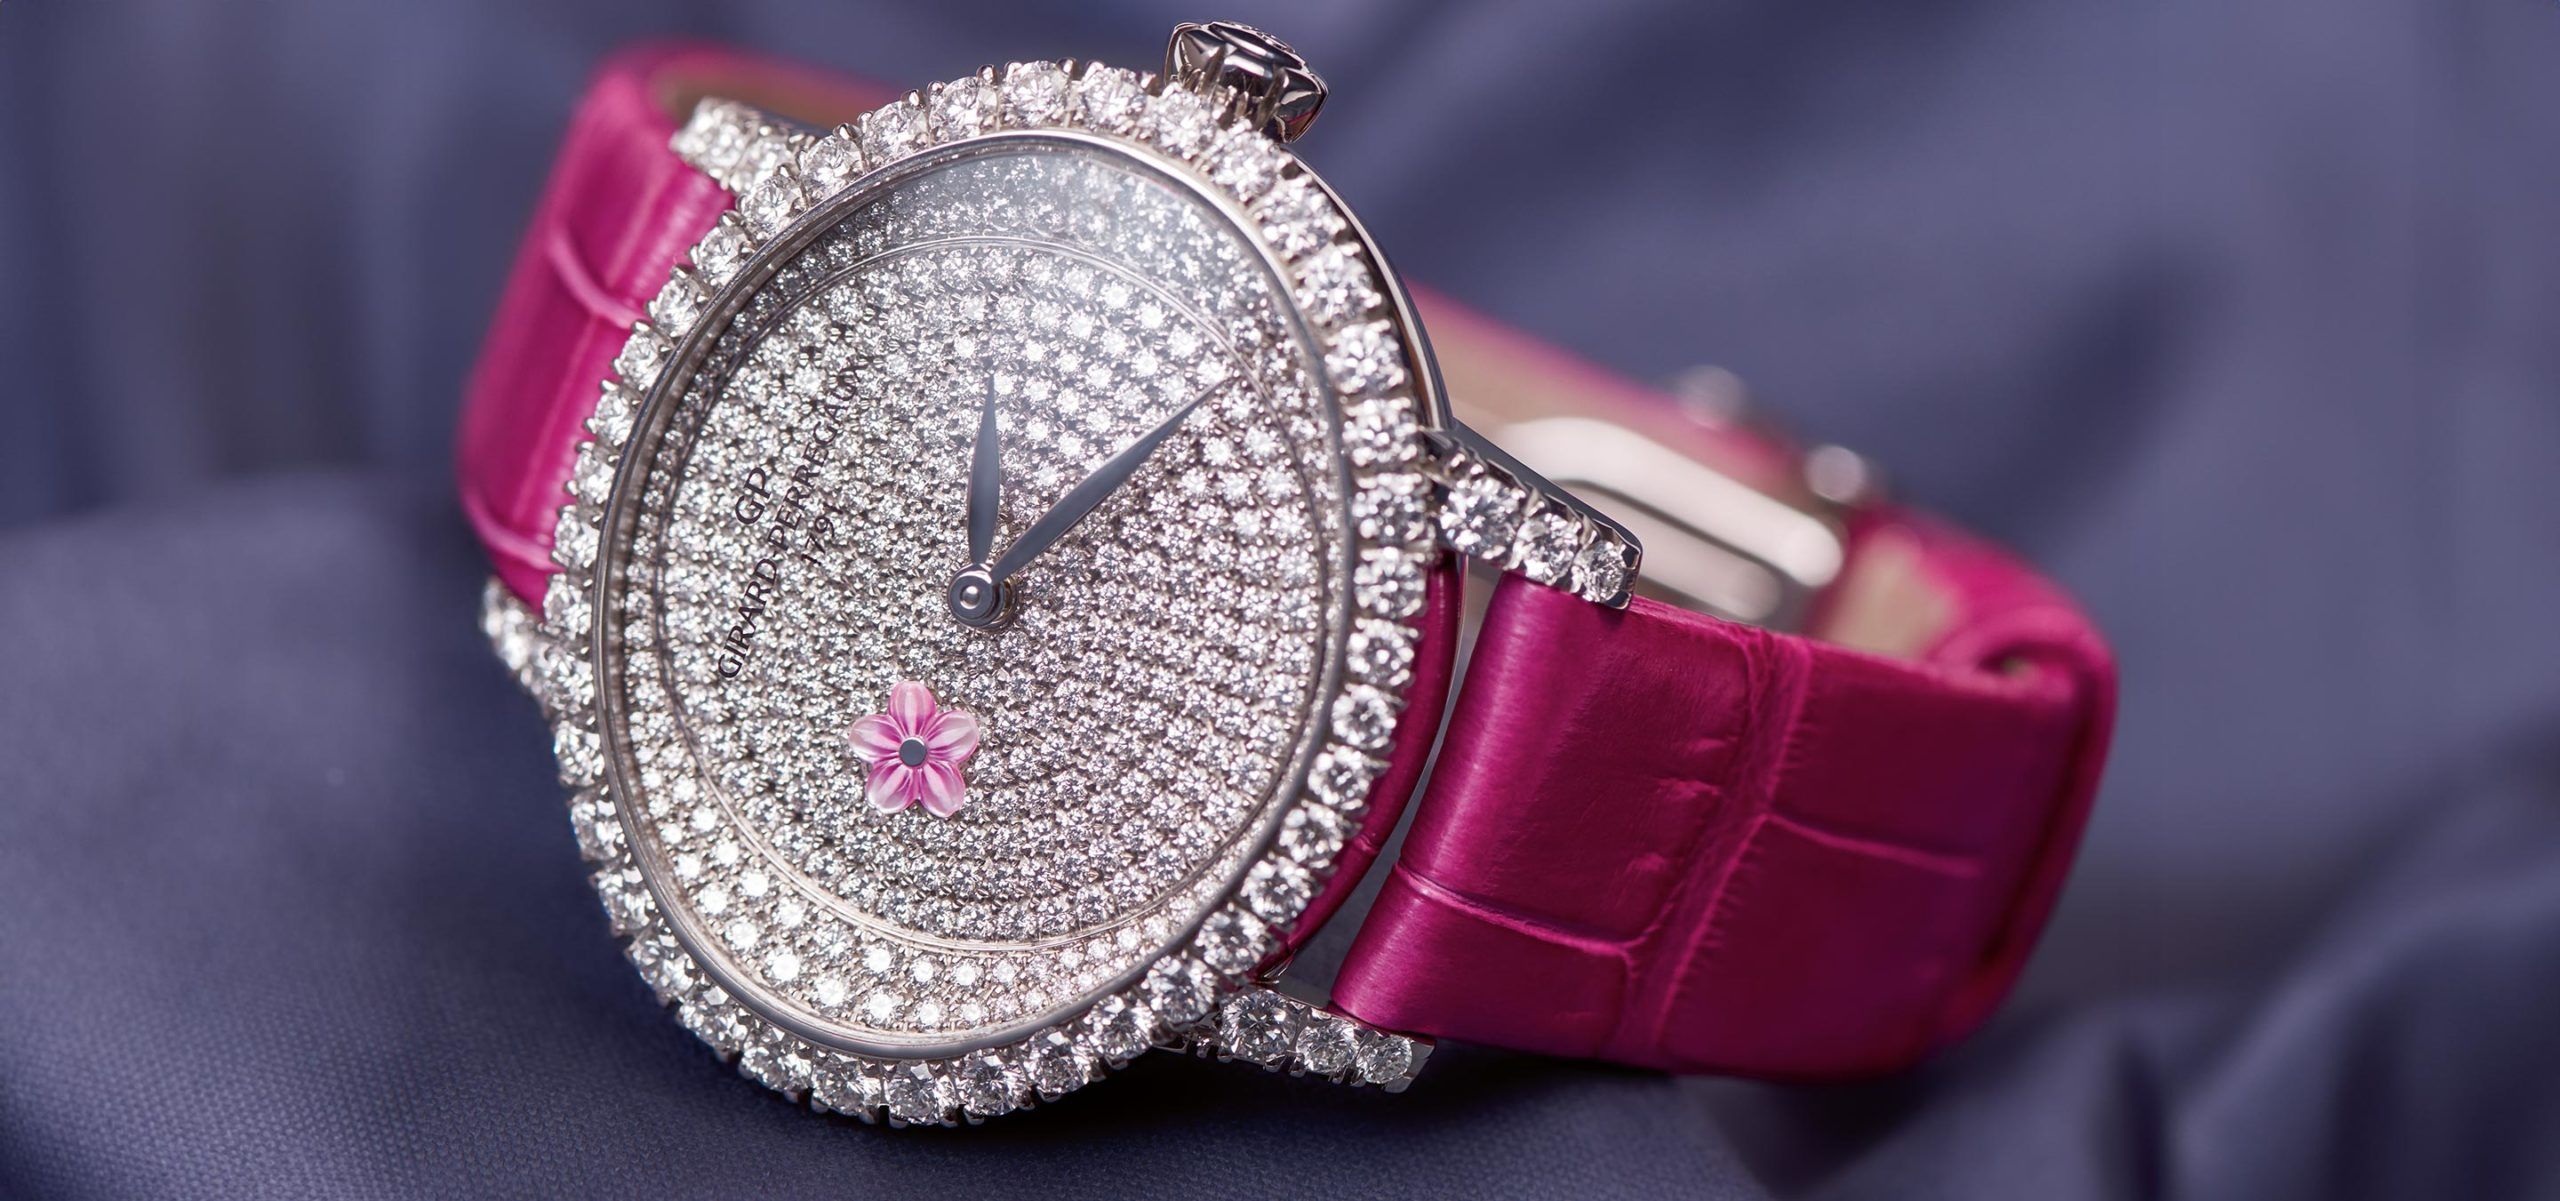 The Sparkling Aura Of Jewelled Watches And Their Prominence In Today’s Time